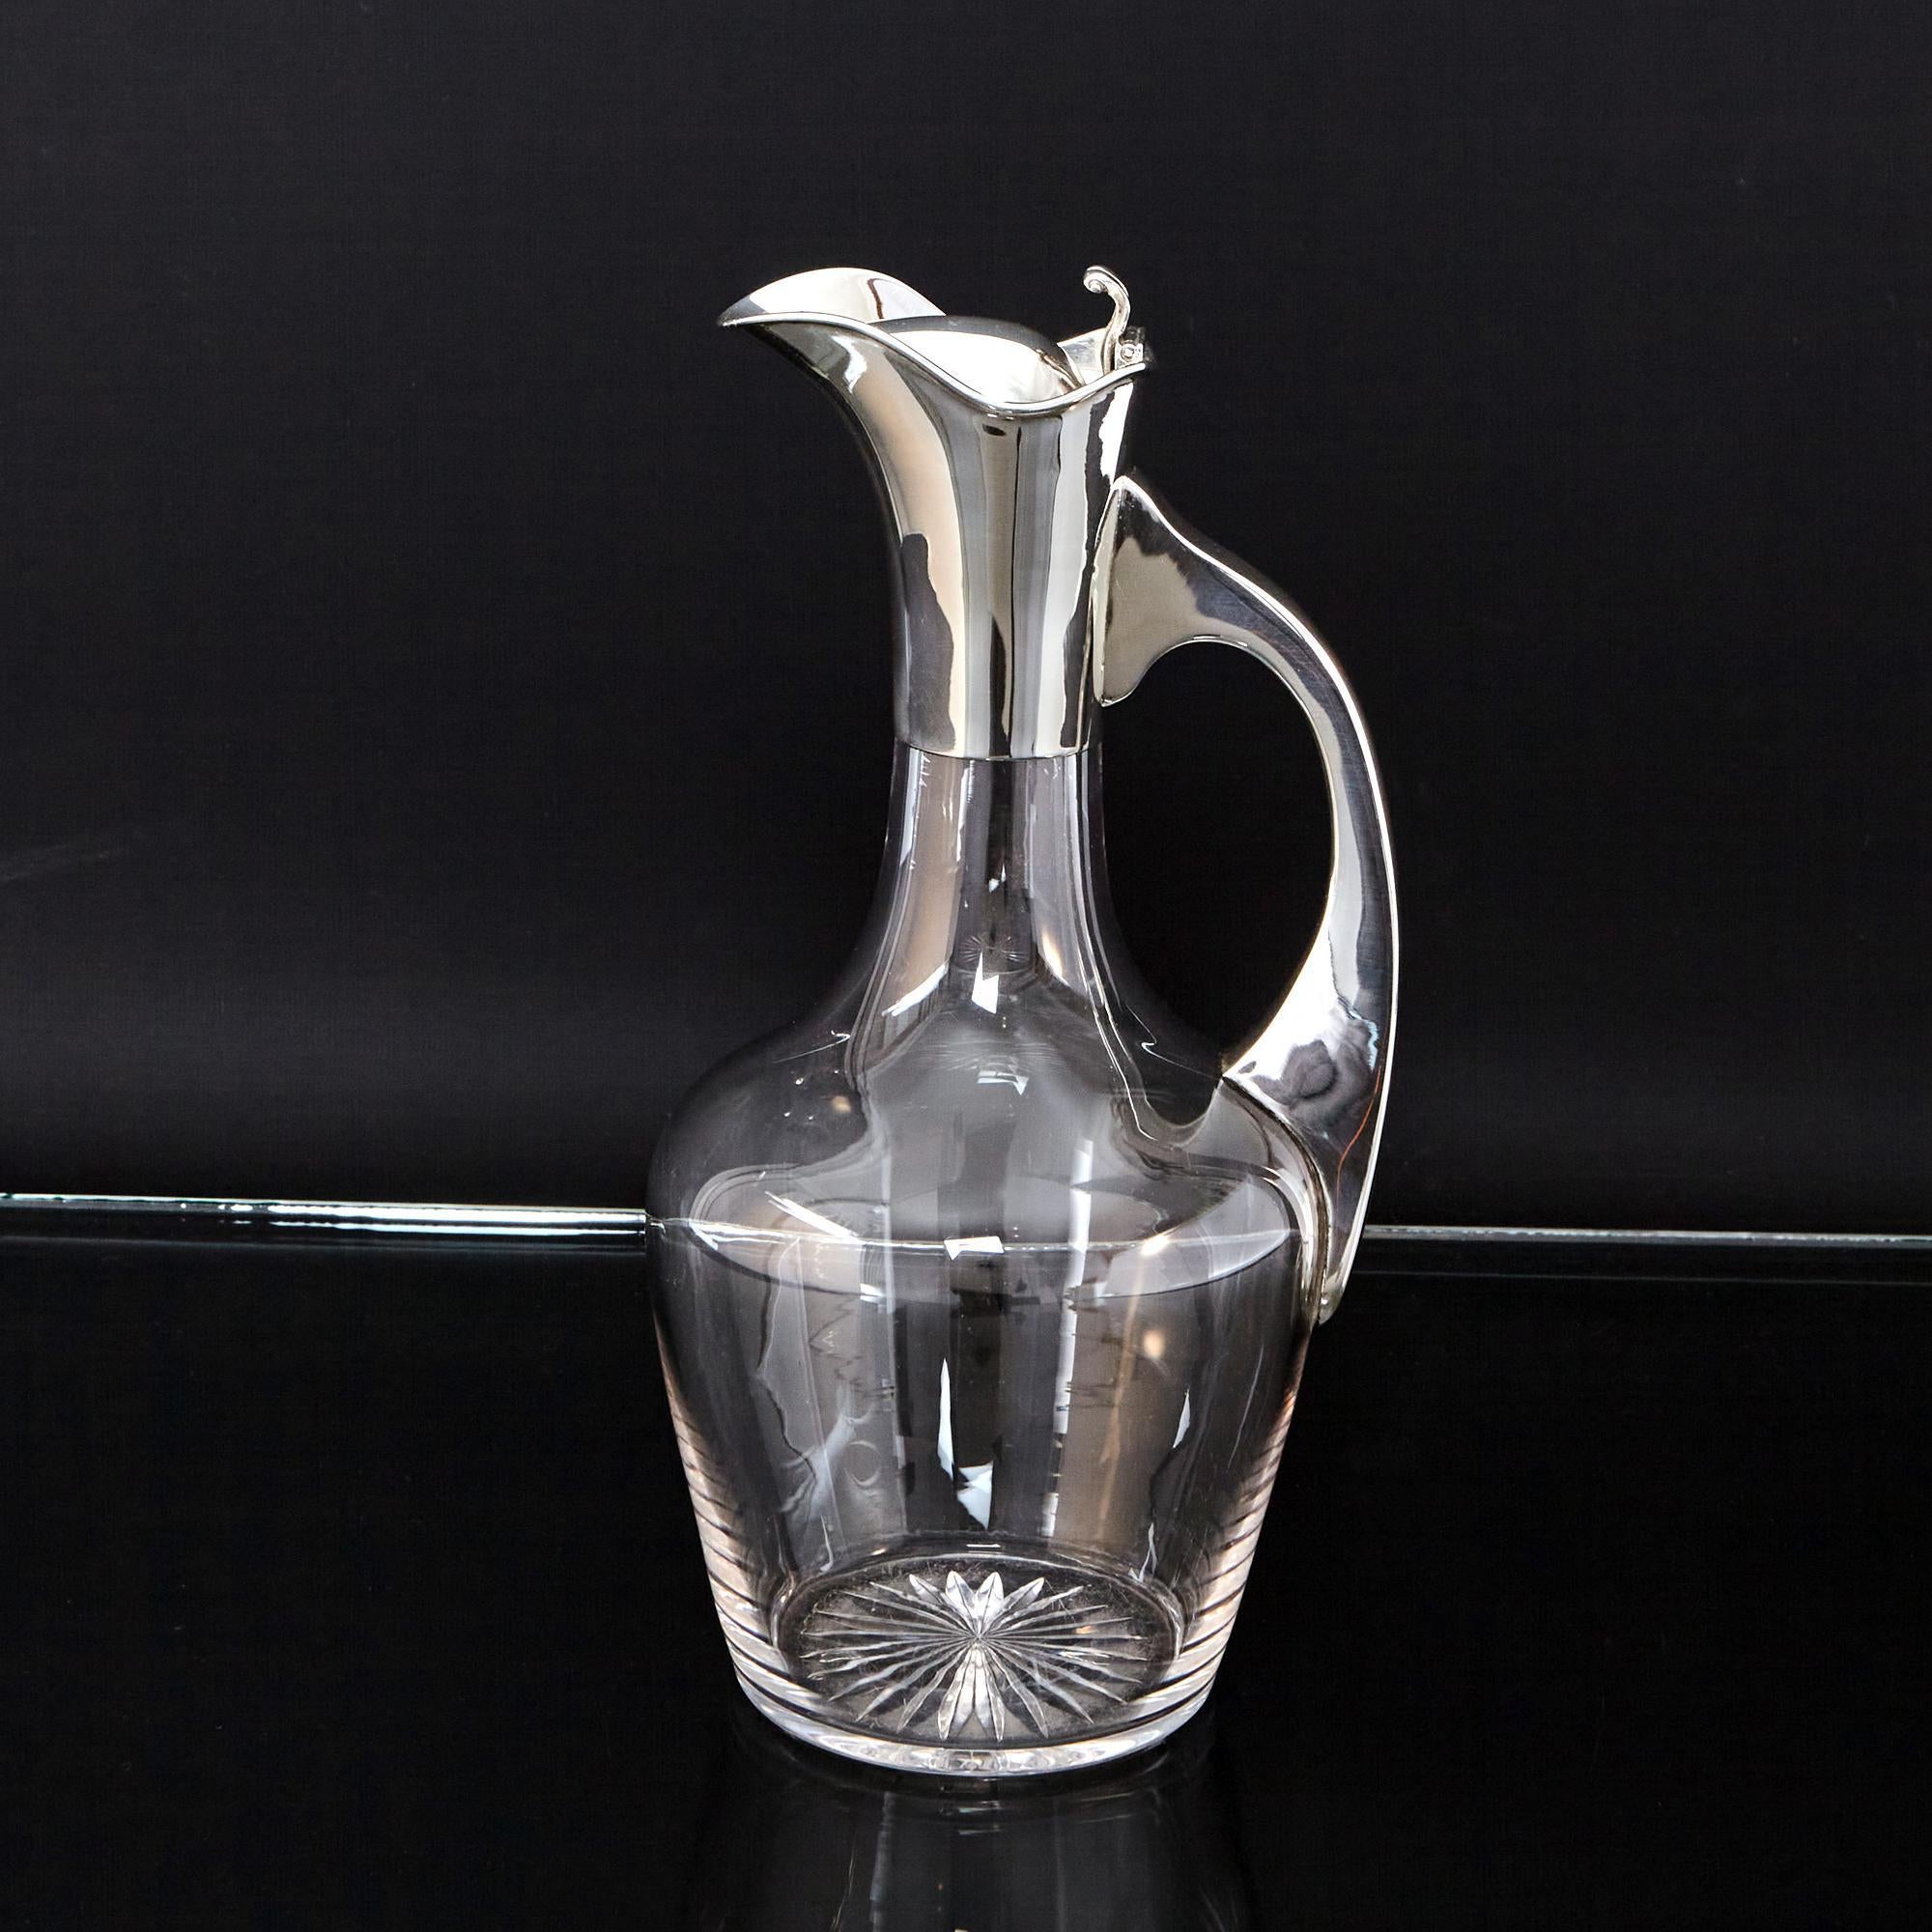 English Antique Edwardian Silver and Glass Claret Jug